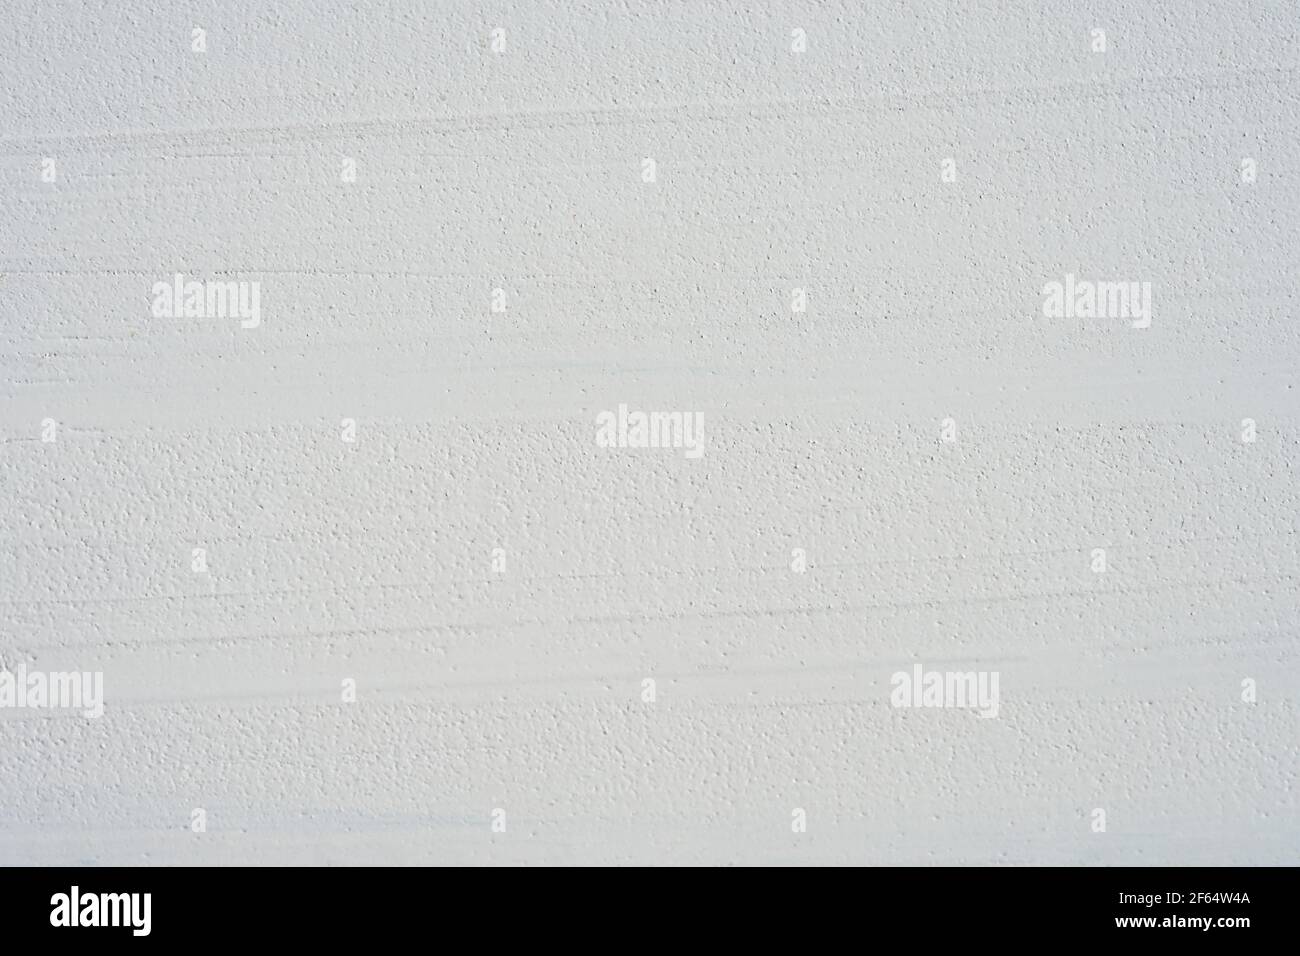 Perfectly white wood plank in horizontal position. Backdrop for website or wallpaper with copy space your design or add text to make work better attra Stock Photo